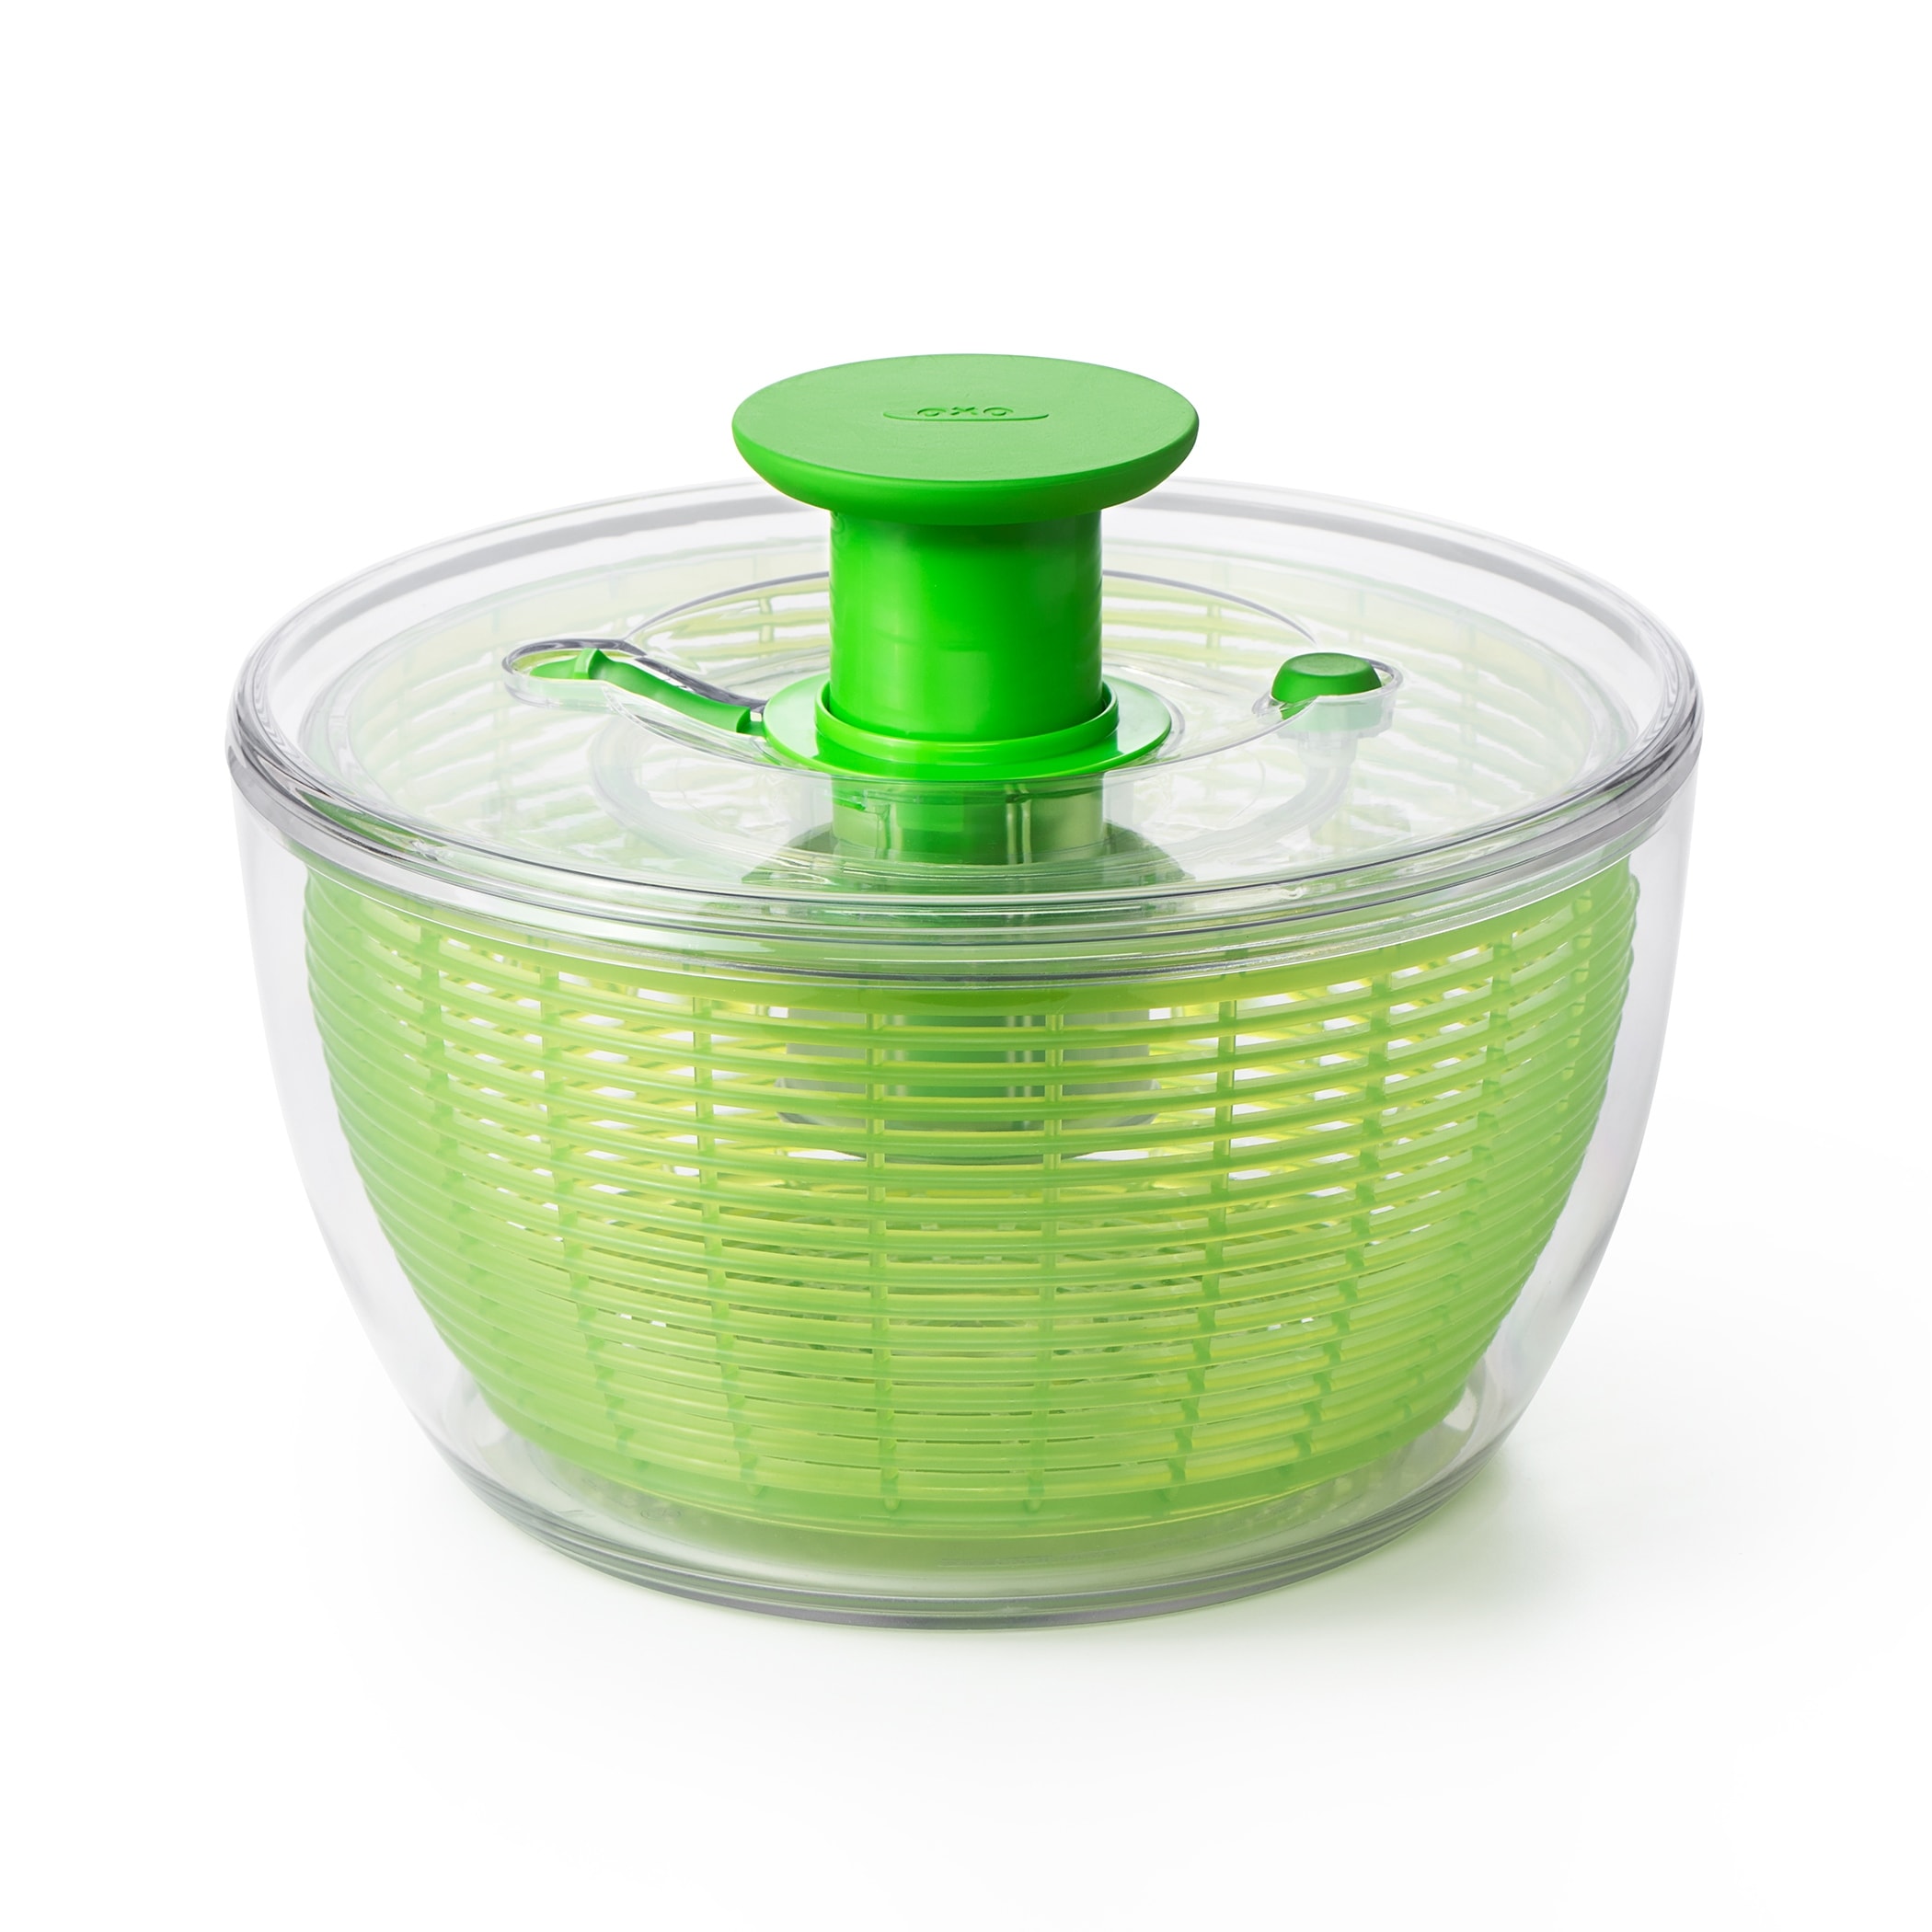 https://ak1.ostkcdn.com/images/products/is/images/direct/5e8adb4e29c87a8aa671fd2412404c993be79902/OXO-Good-Grips-Salad-Spinner---Green.jpg